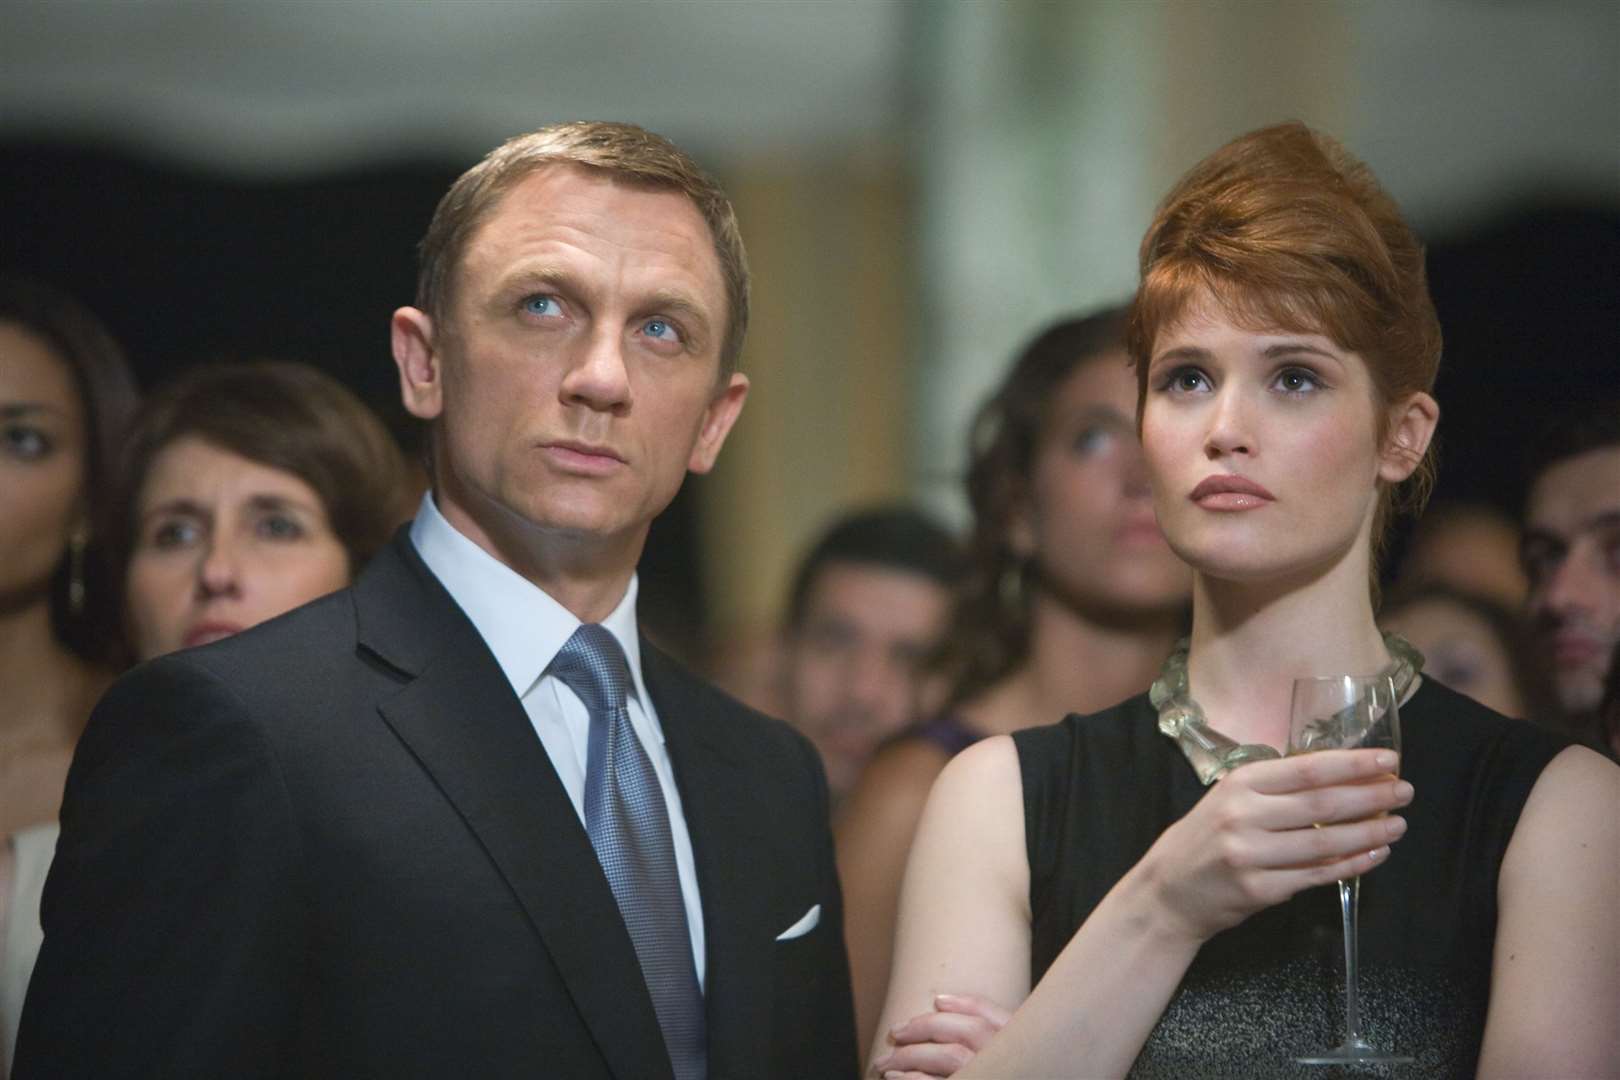 Gravesend-born Gemma got her big break as a Bond Girl. Picture: Sony Pictures